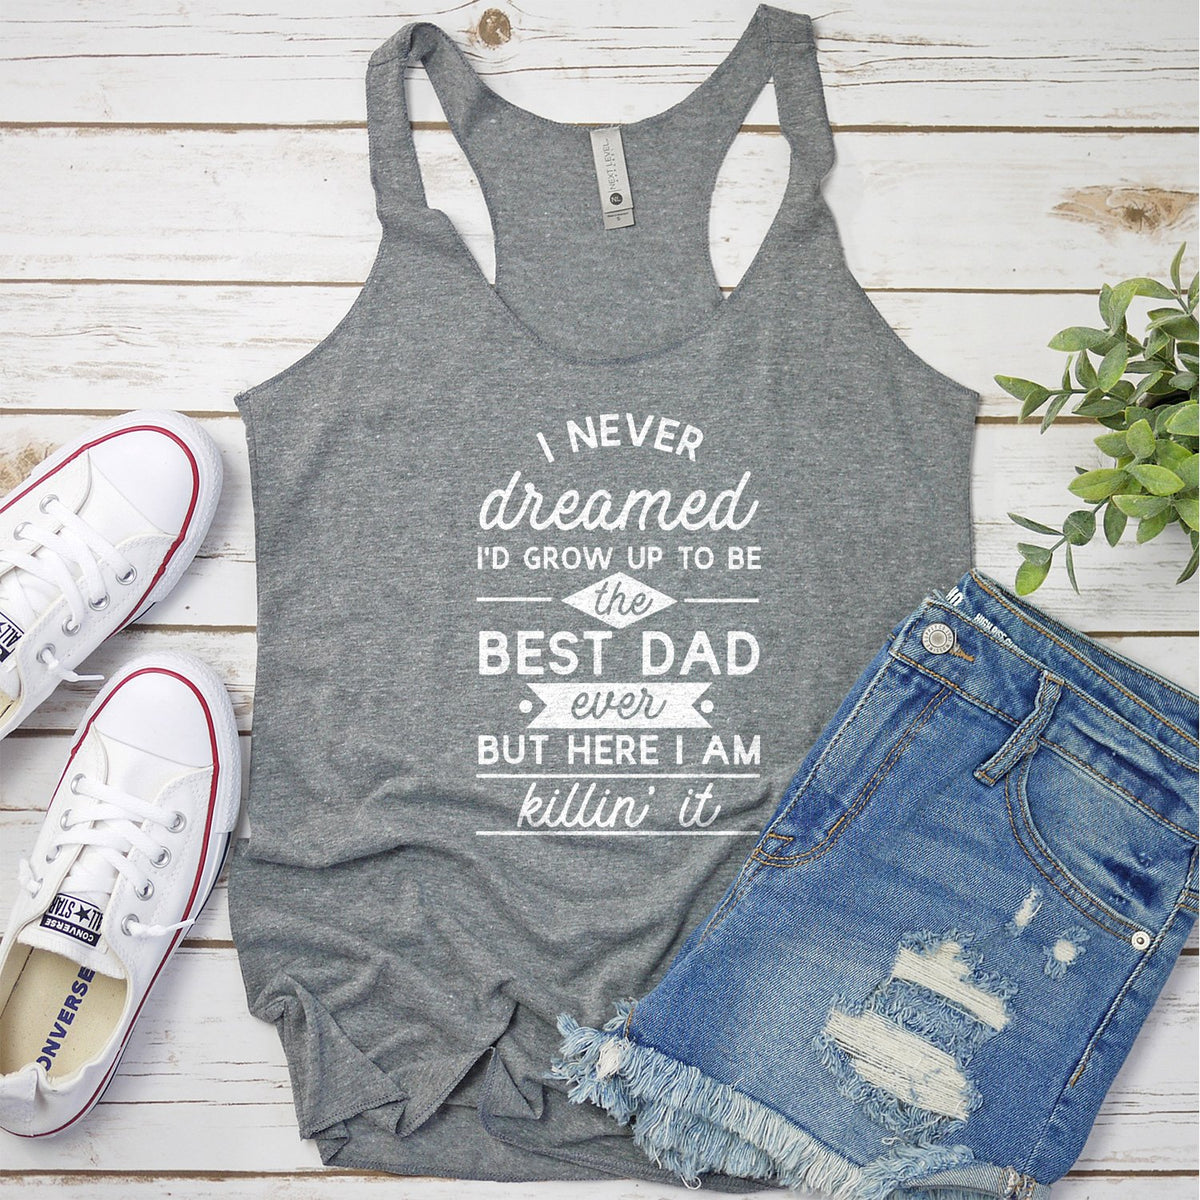 I Never Dreamed I&#39;d Grow up to Be the Best Dad Ever - Tank Top Racerback